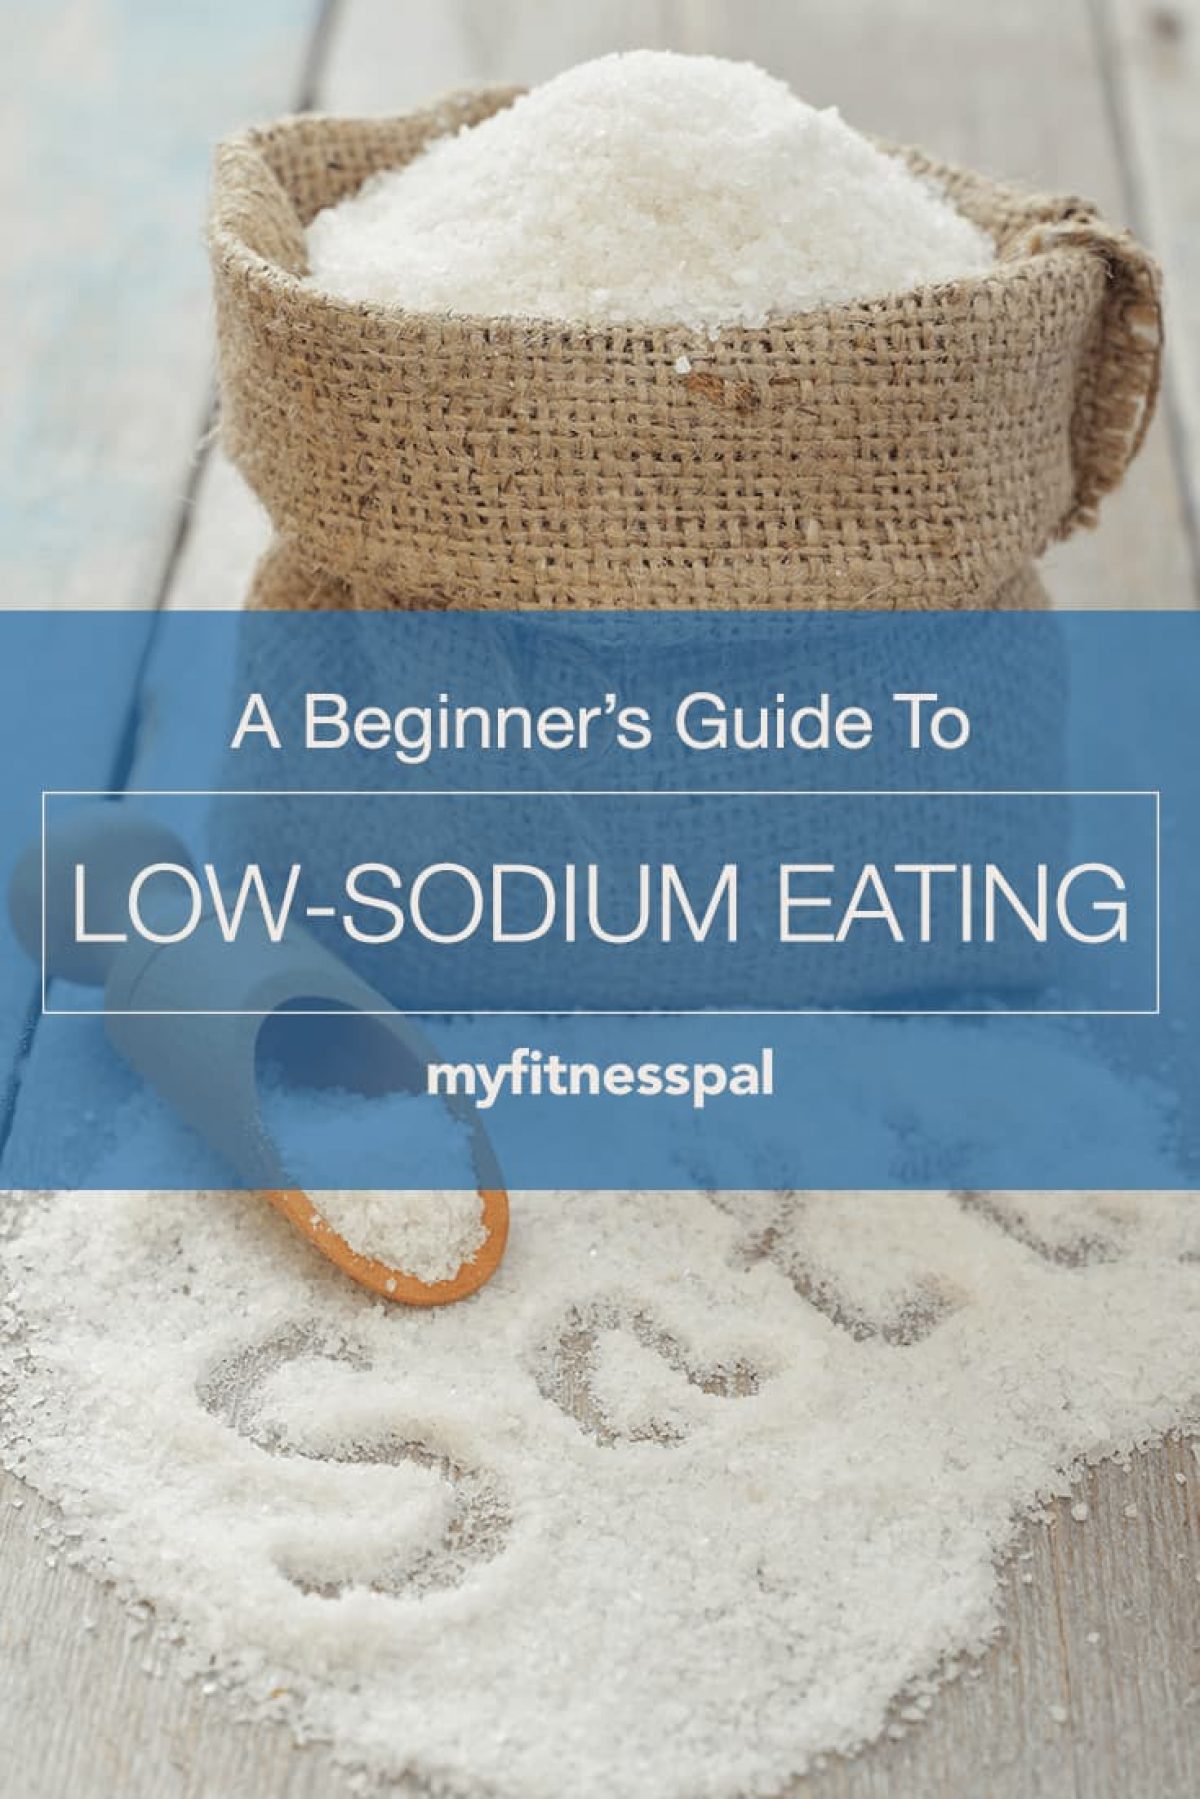 https://blog.myfitnesspal.com/wp-content/uploads/2015/05/A-Beginners-Guide-to-Low-Sodium-Eating-1200x1799.jpg